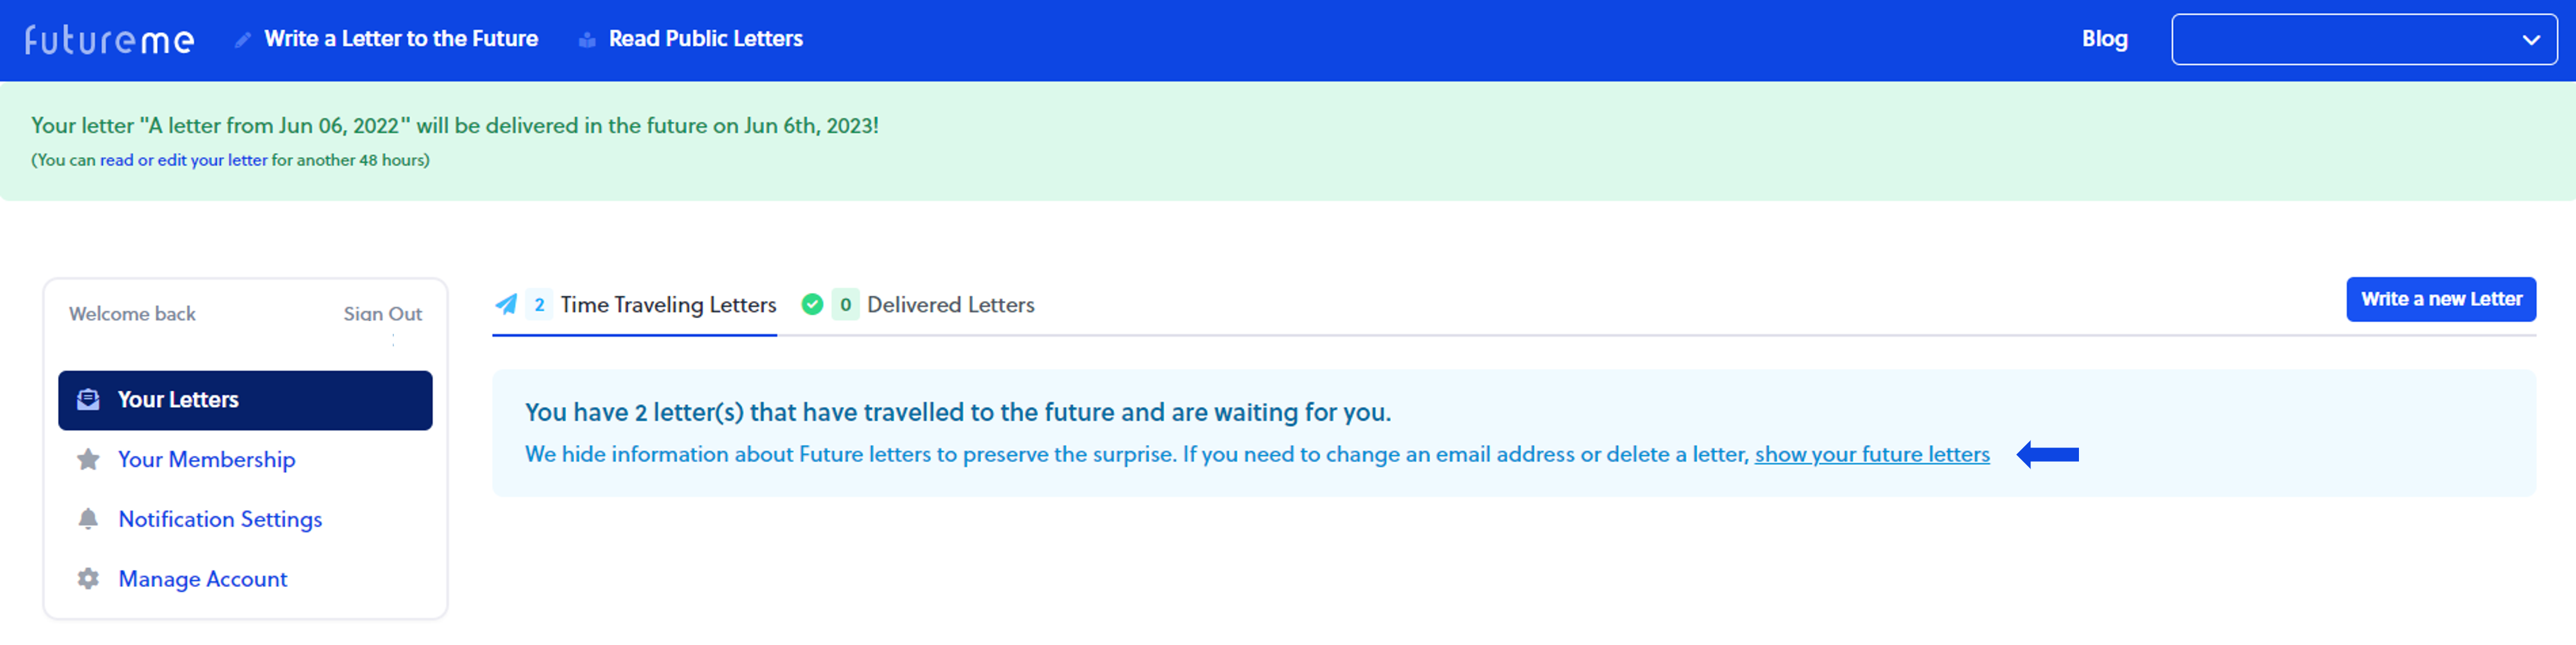 Show_your_future_letters_NEW.png